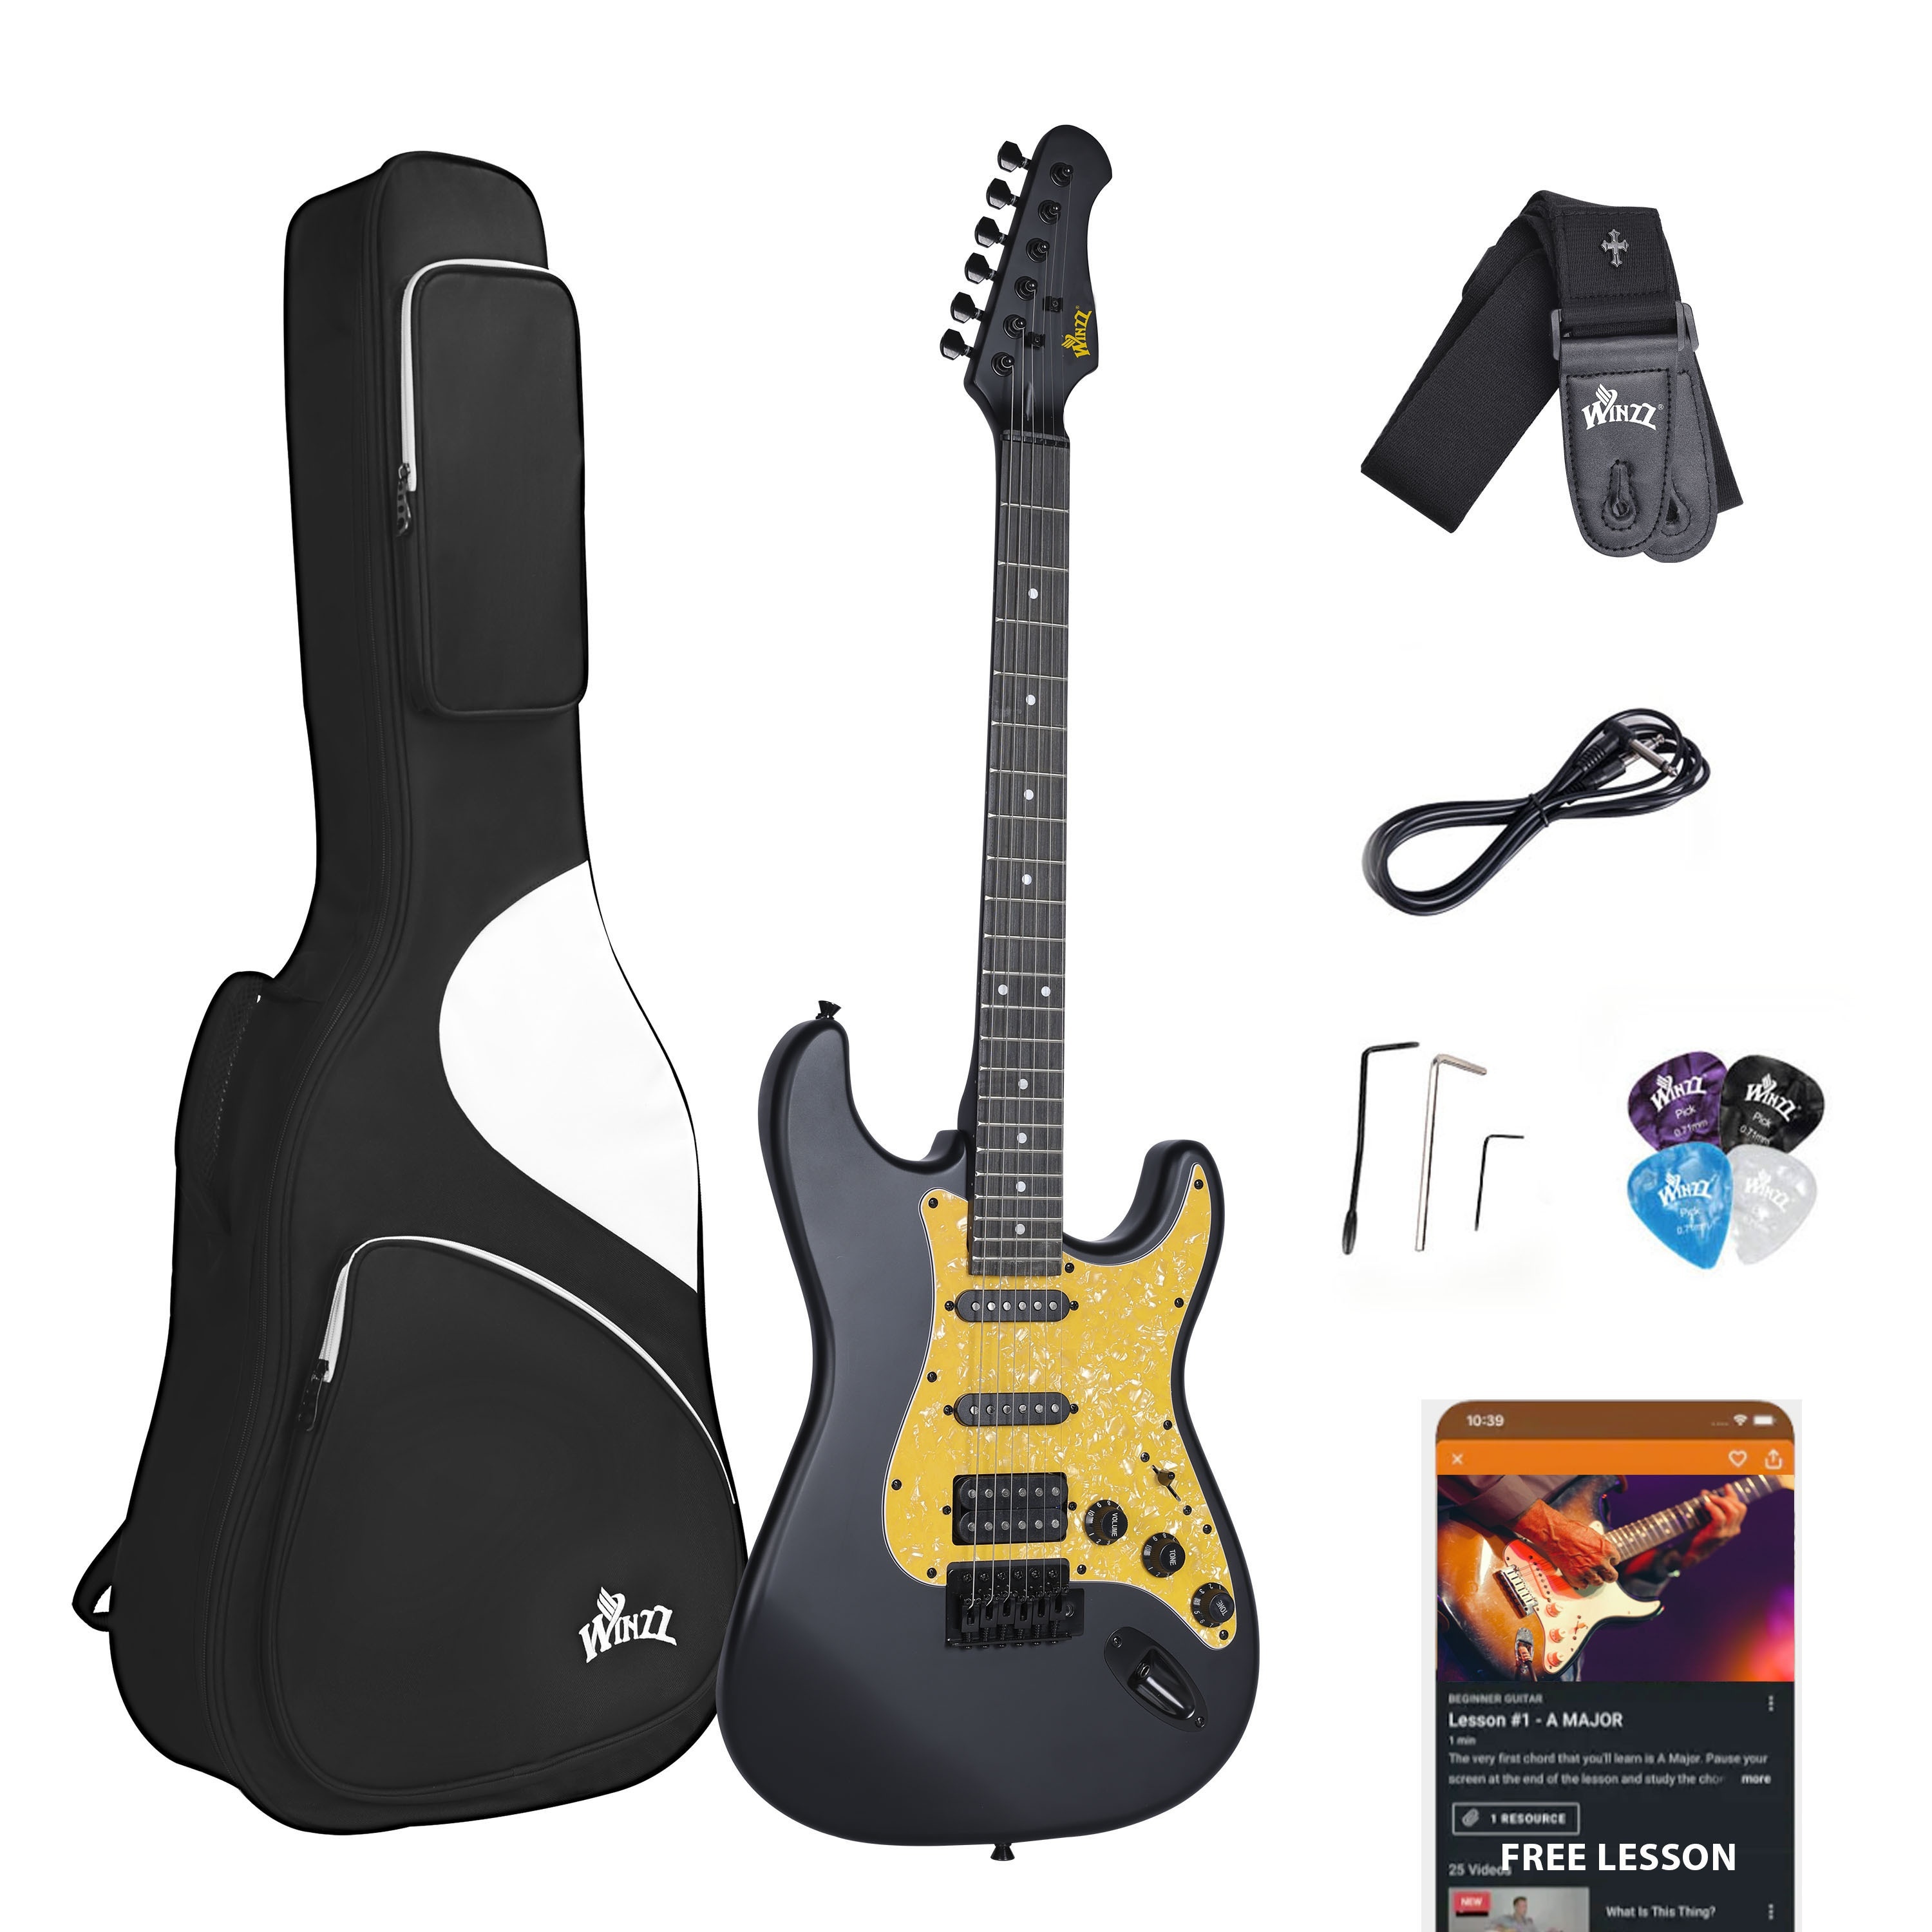 

Tg-e1 39 Inch Full Size Solidwood Electric Guitar Hss Pickup With 10mm Padding Bag, Cable, Strap, Picks, Matte Black